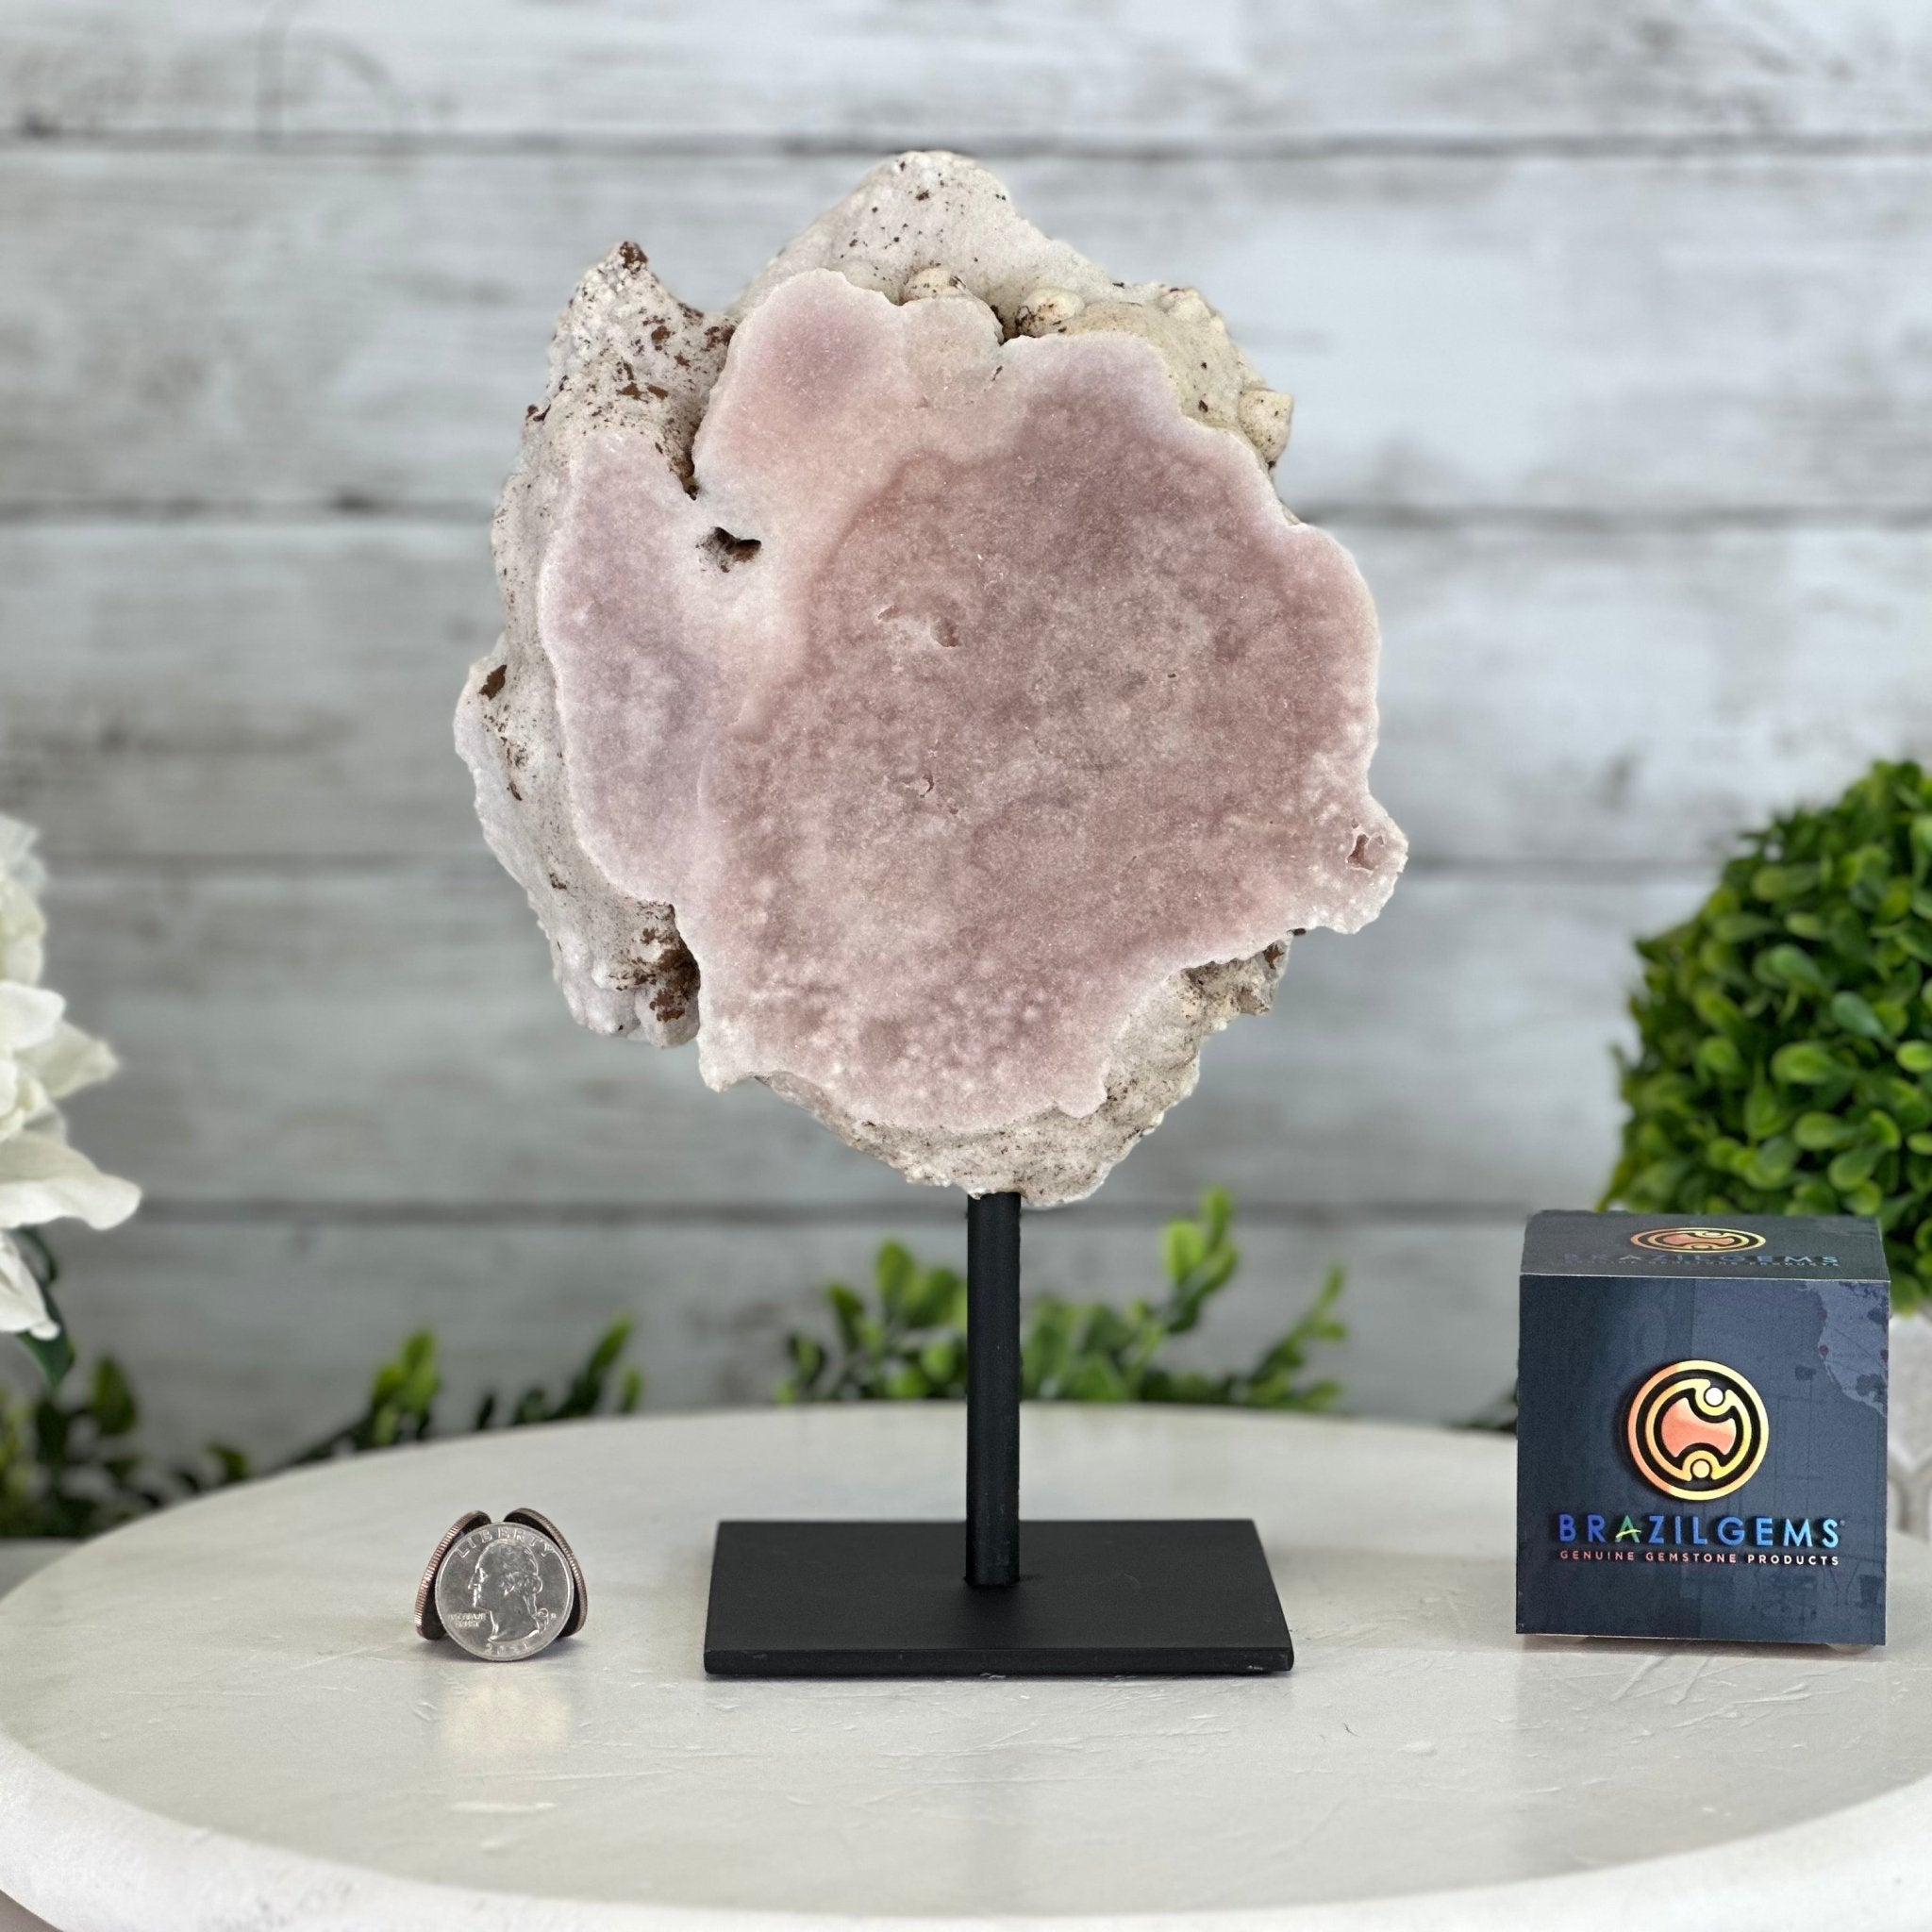 Pink Amethyst Slice on a Stand, 5.7 lbs and 10.2" Tall #5742-0139 - Brazil GemsBrazil GemsPink Amethyst Slice on a Stand, 5.7 lbs and 10.2" Tall #5742-0139Slices on Fixed Bases5742-0139